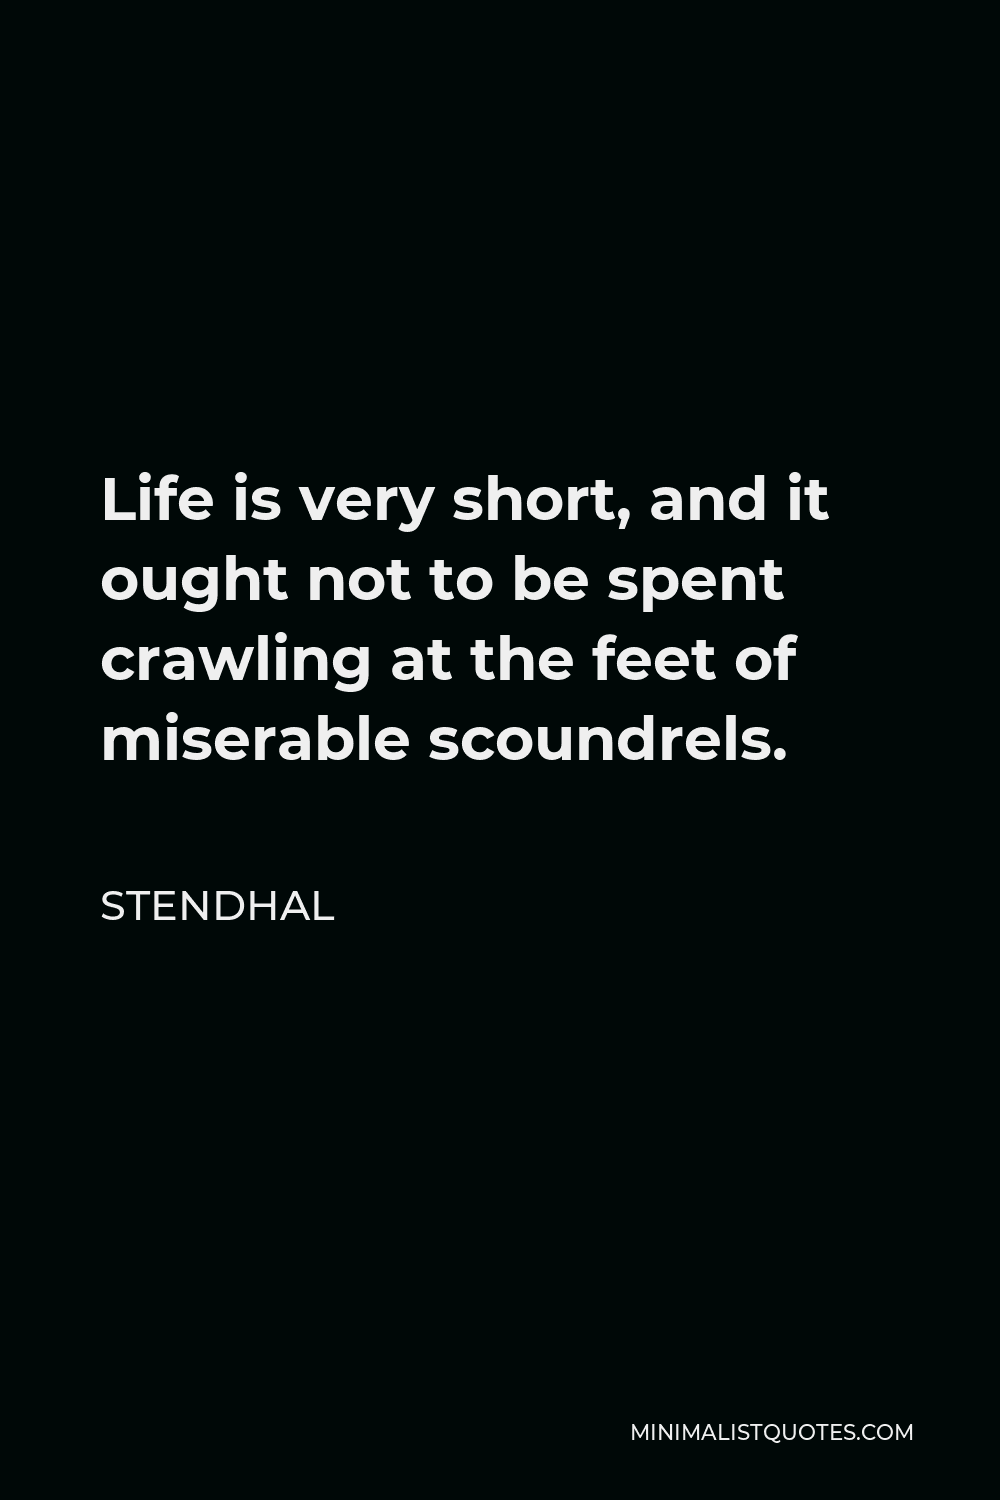 Stendhal Quote - Life is very short, and it ought not to be spent crawling at the feet of miserable scoundrels.